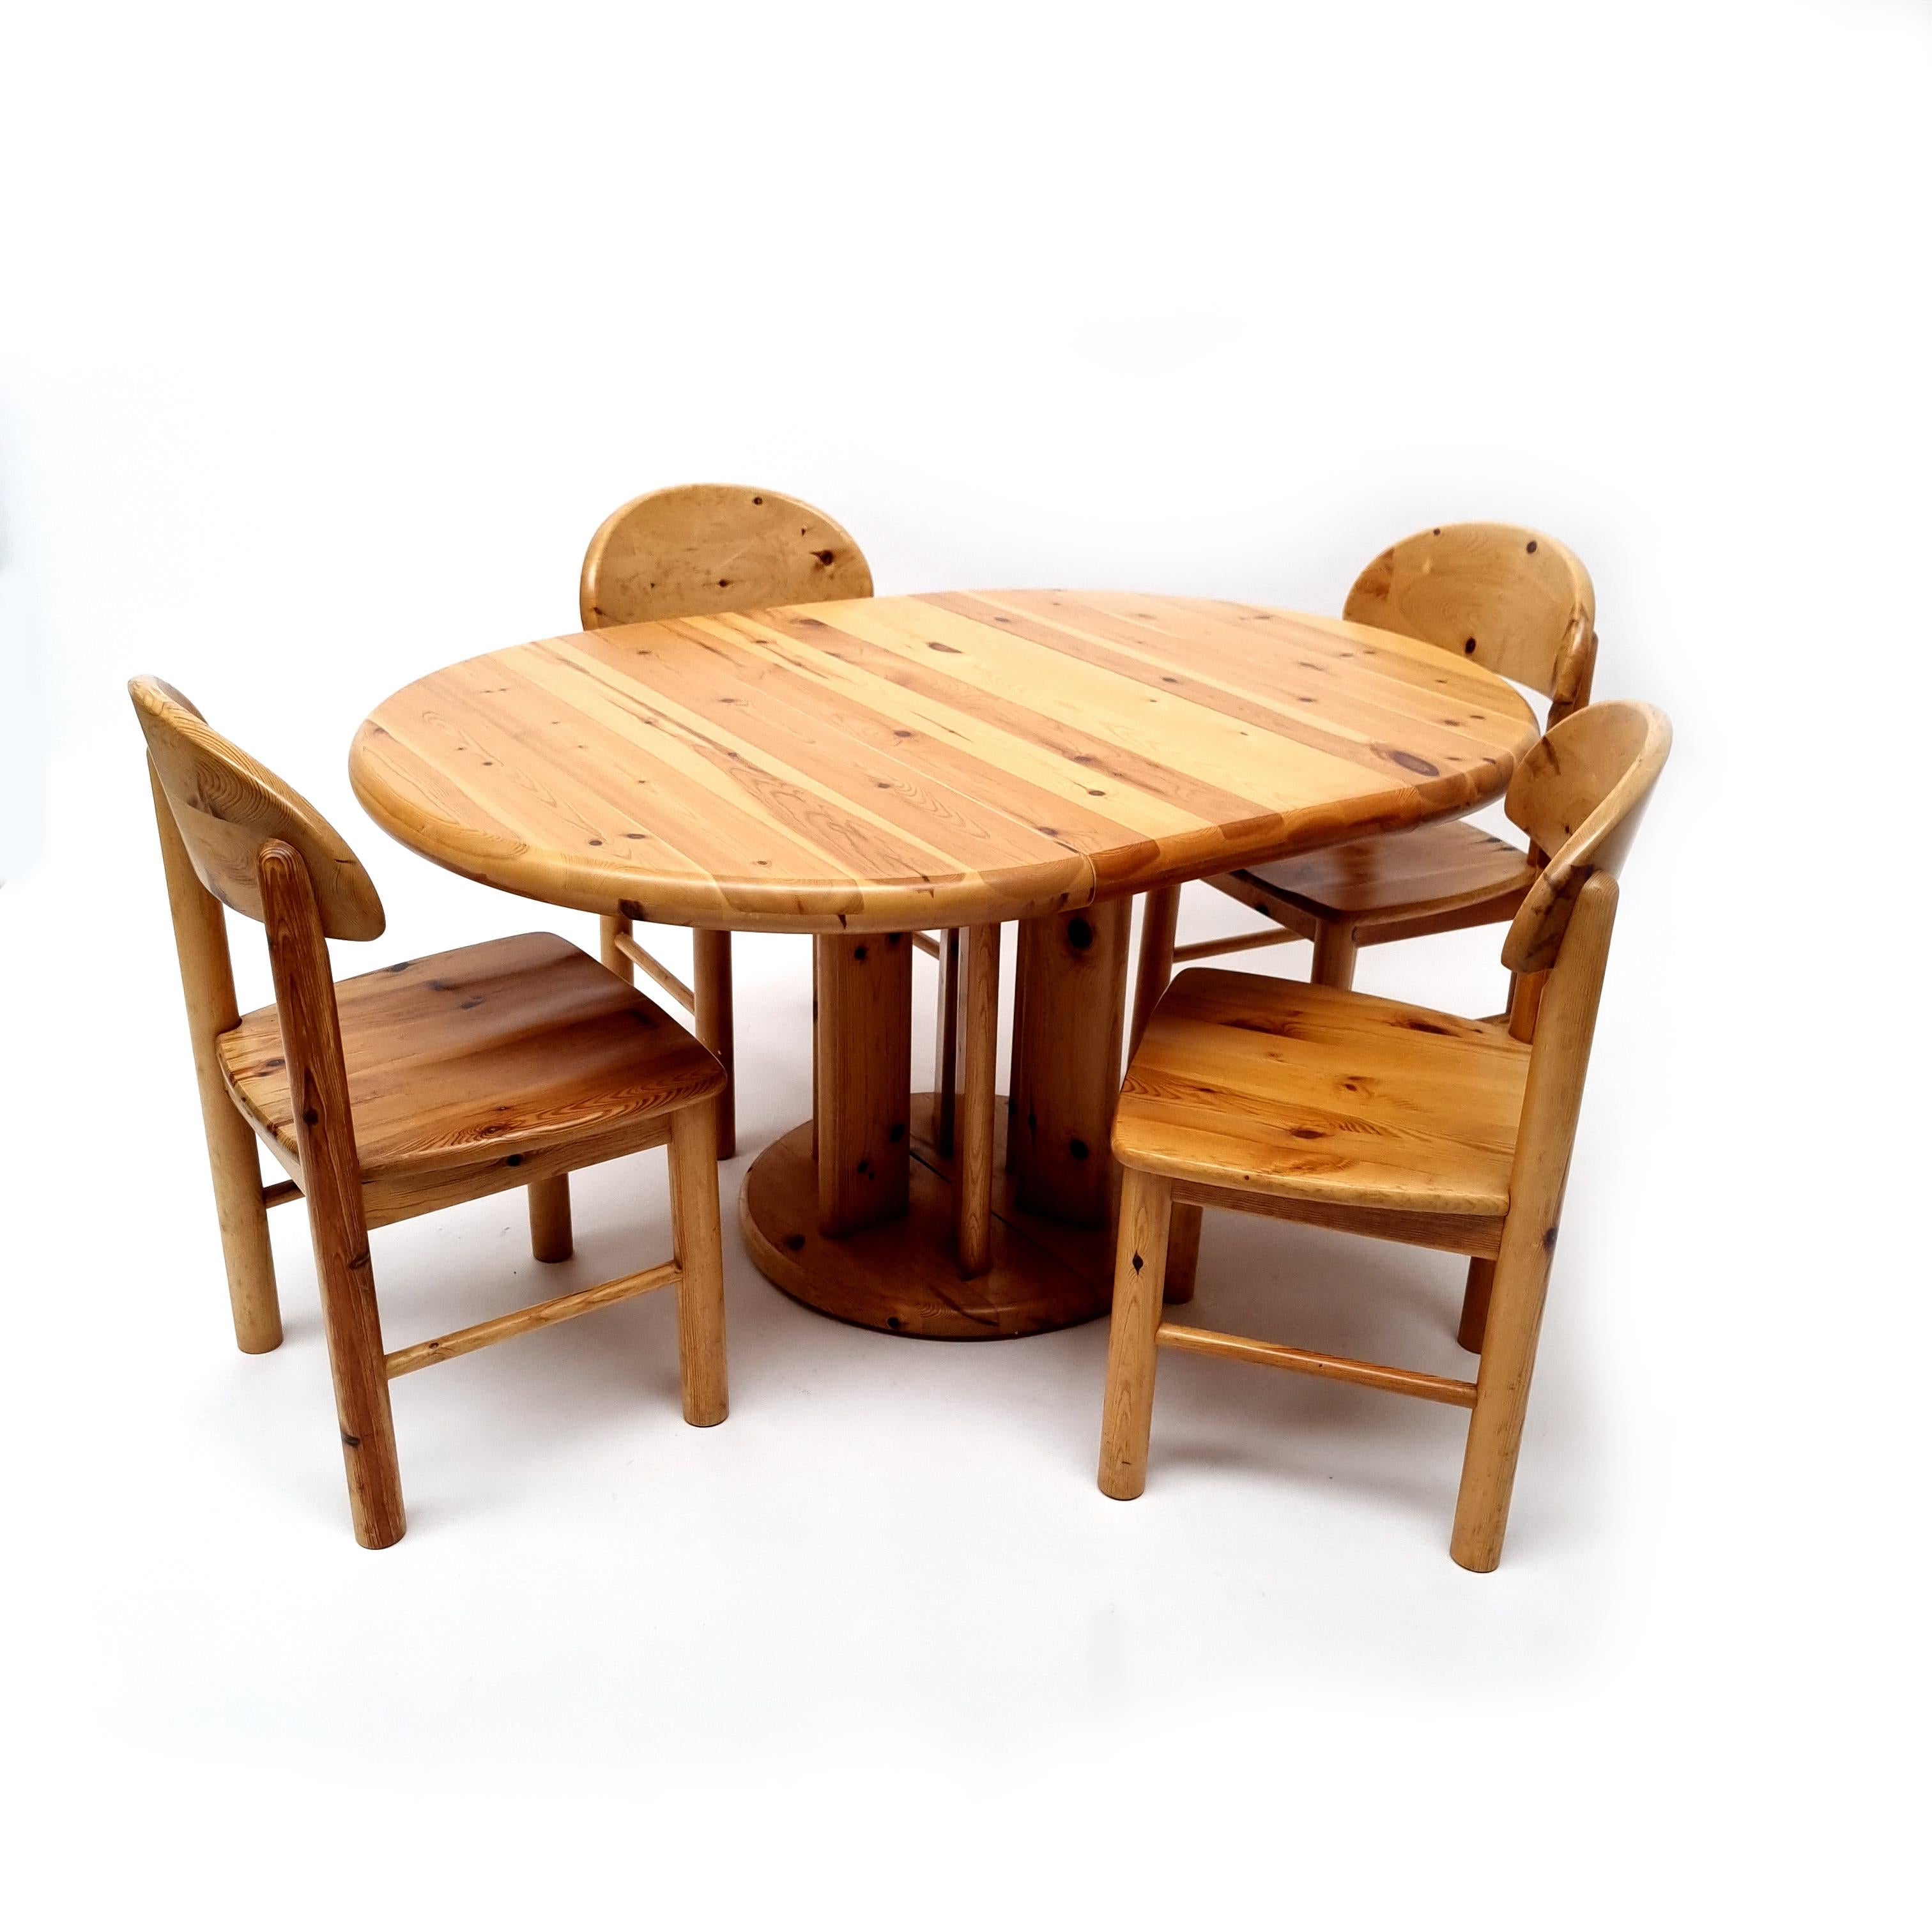 Pine dining set consisting 4 chairs and a pine table by Rainer Daumiller. Manufactured in Denmark, circa 1970. The table (with a 50cm extension!) is made in the highest quality solid pinewood and has gained a nice honey colored patina through the